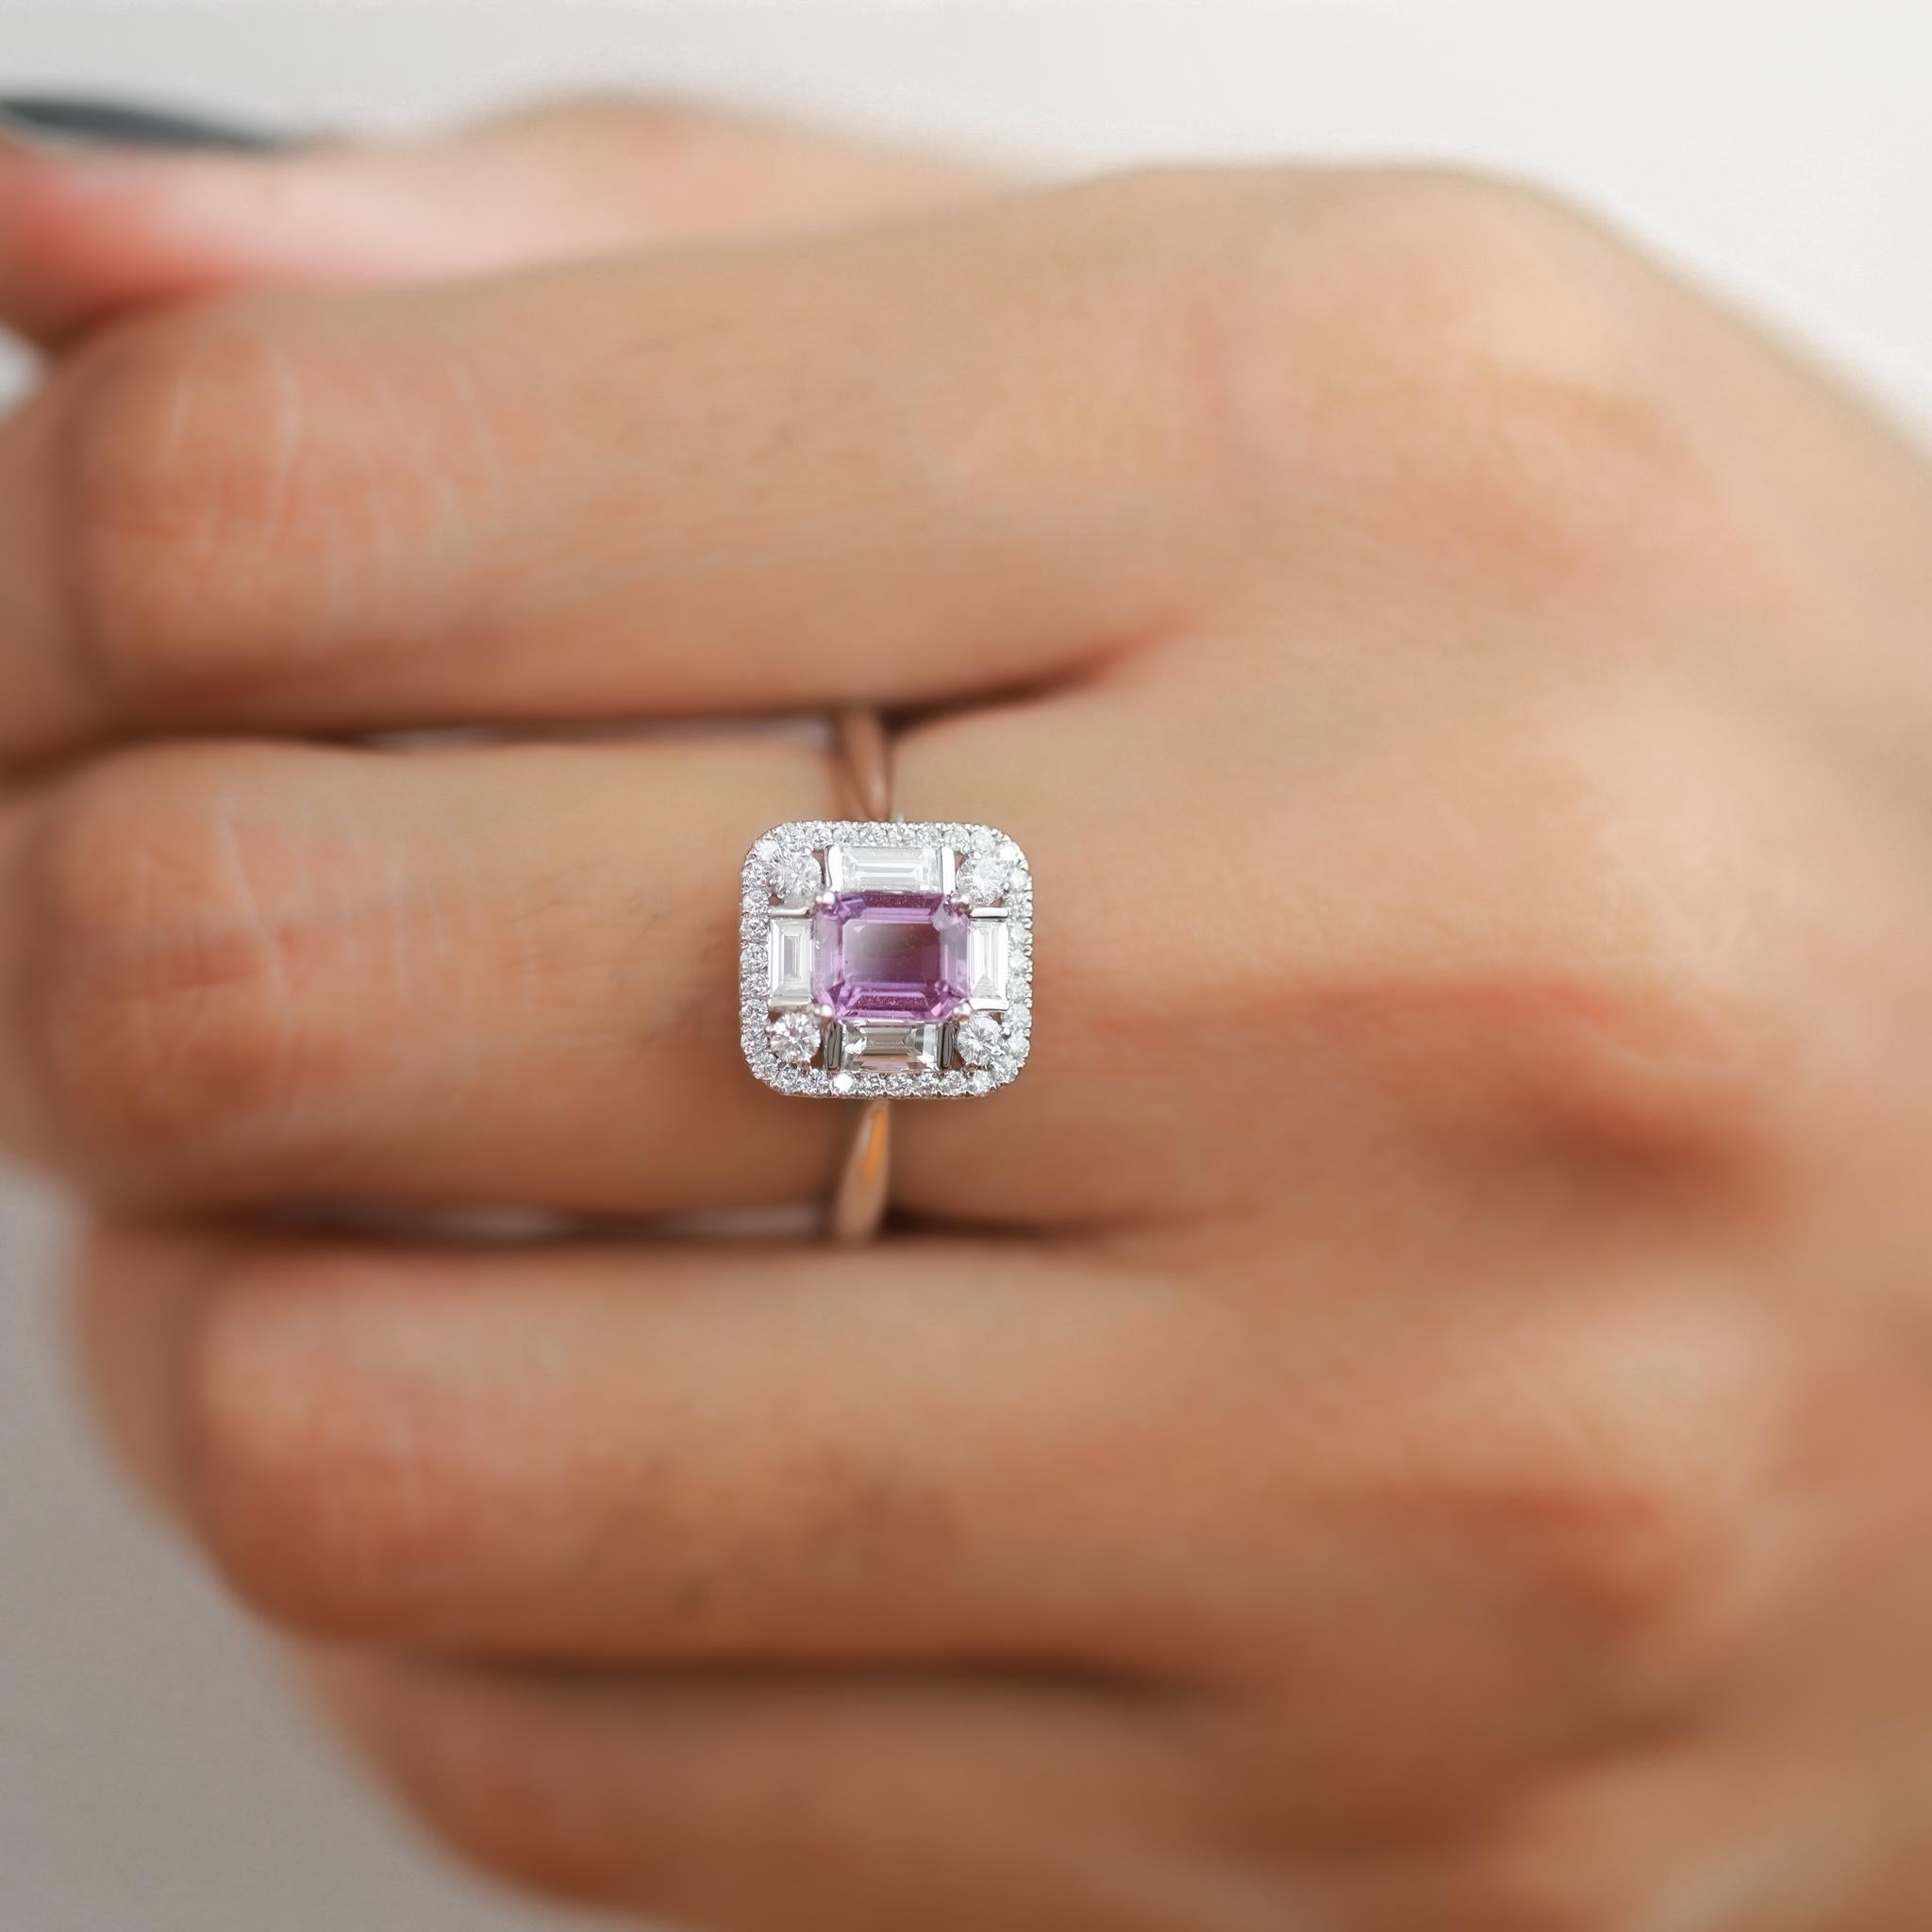 Women's 1 Carat Pink Sapphire Diamond Cocktail Engagement Ring in 18k White Gold For Sale